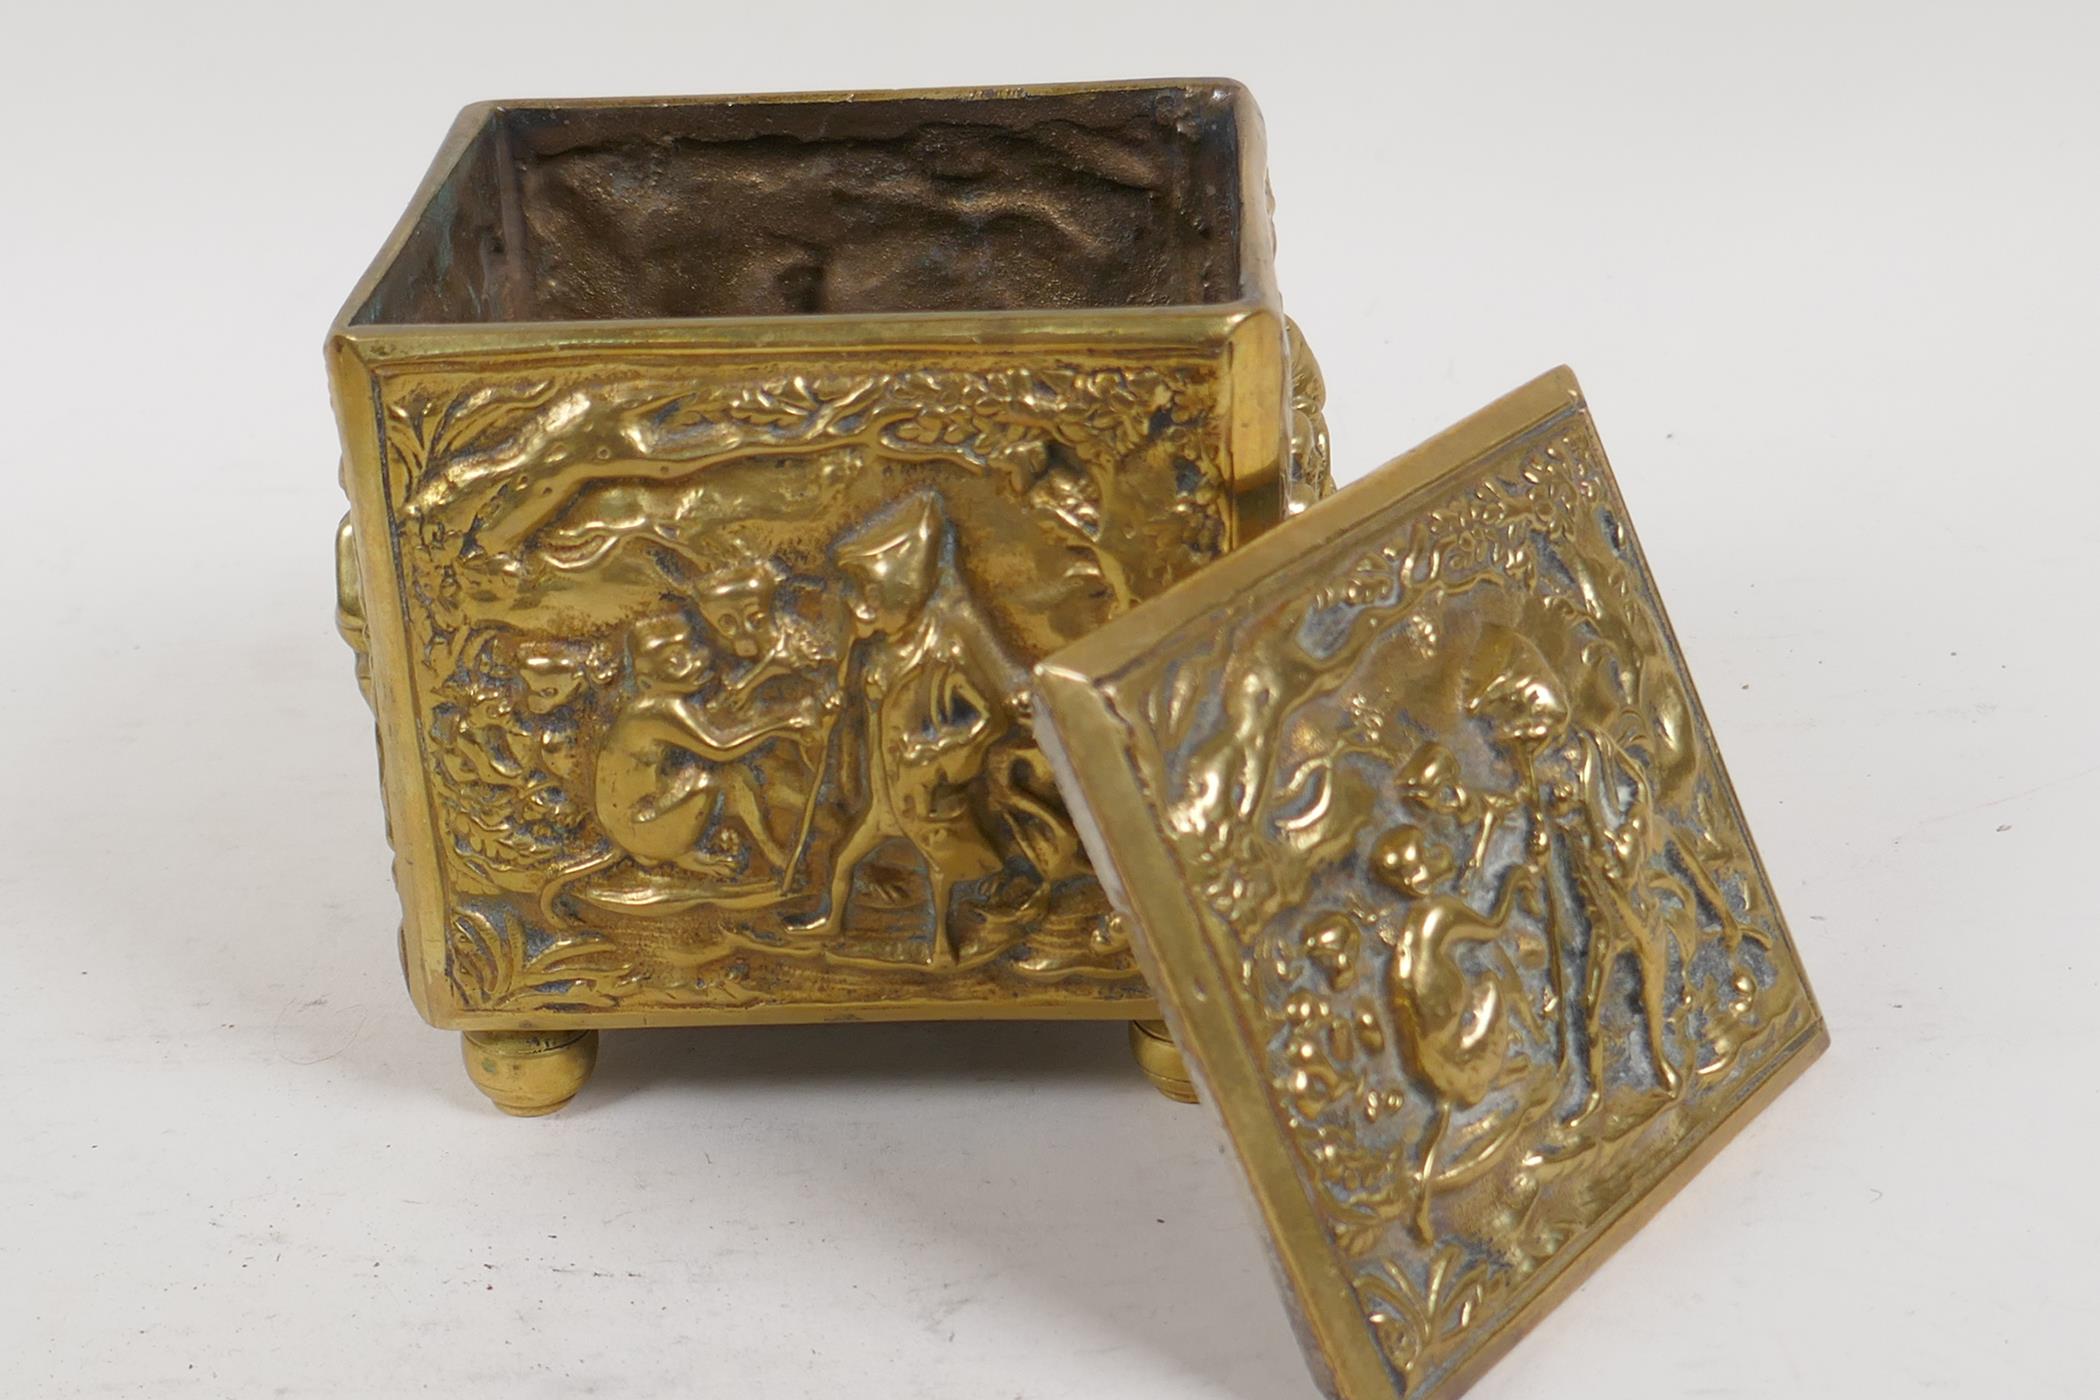 A late C18th/early C19th Dutch brass tobacco box embossed with a scene of a travelling monkey - Image 3 of 4